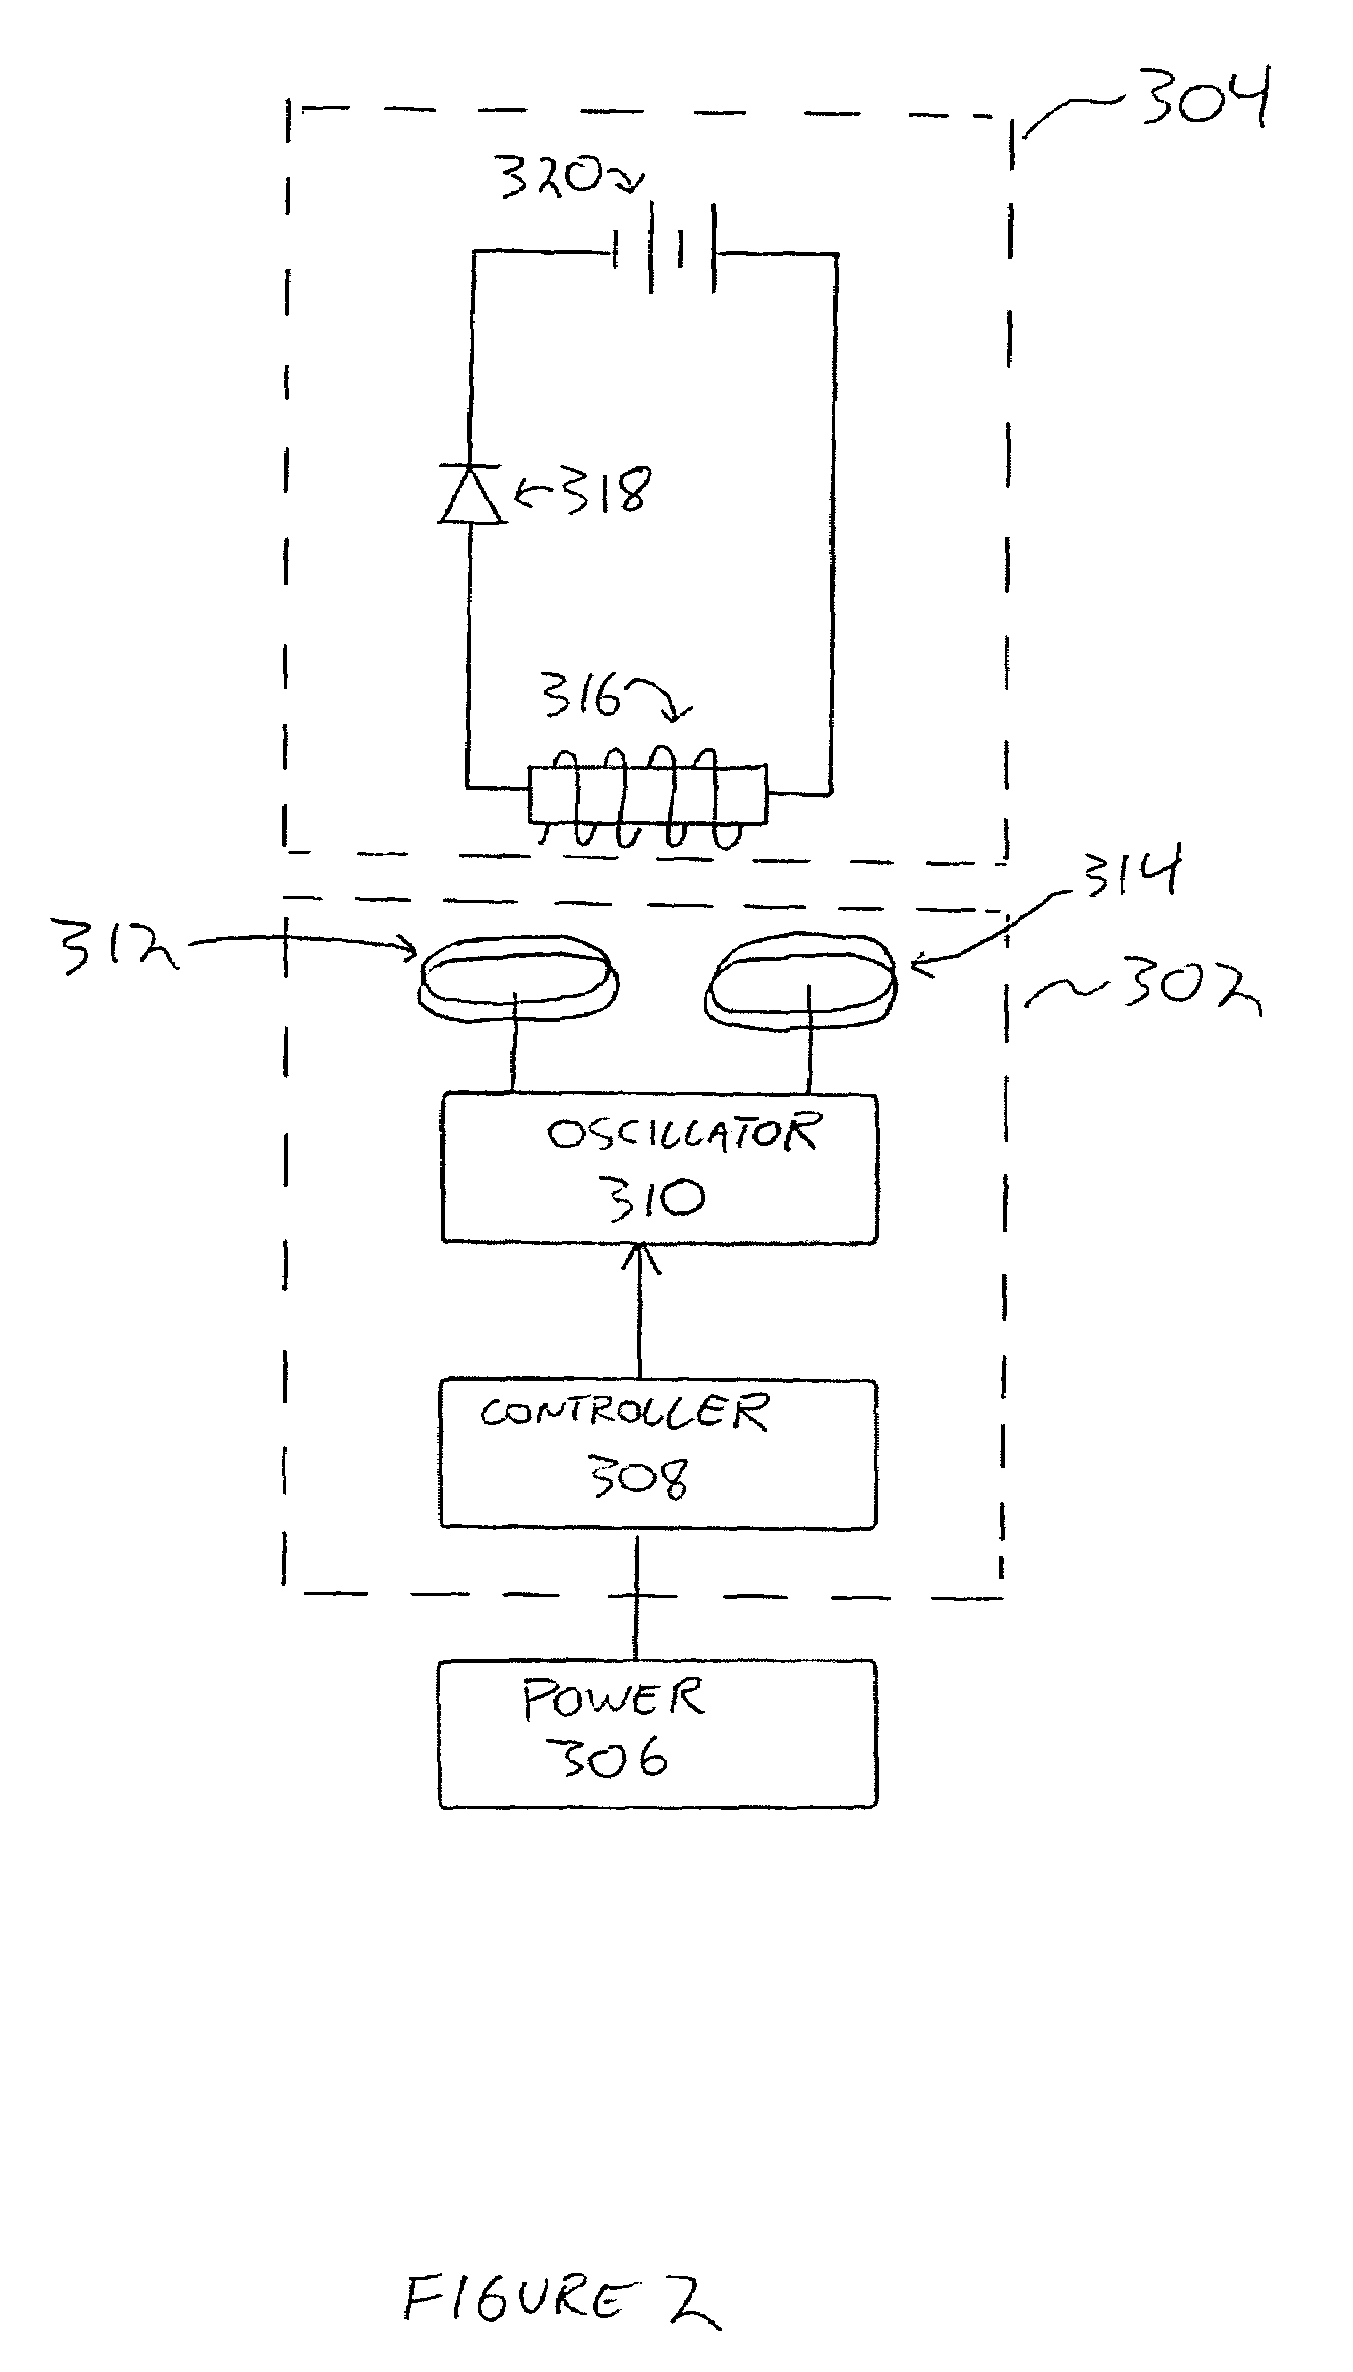 Inductive charging system